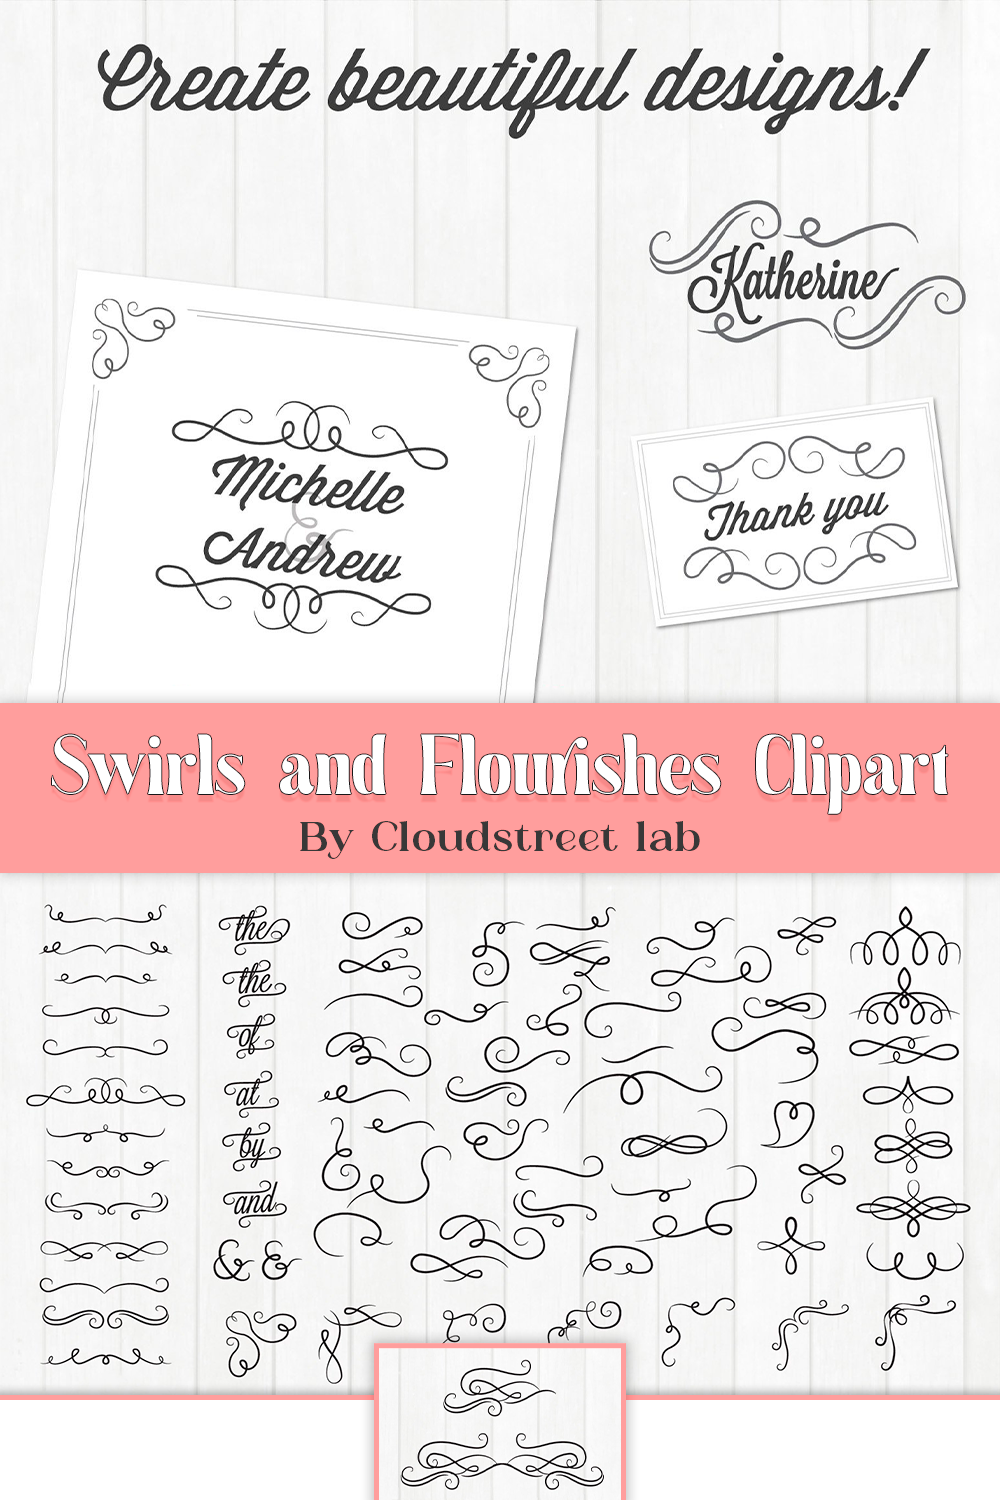 Swirls and flourishes clipart of pinterest.